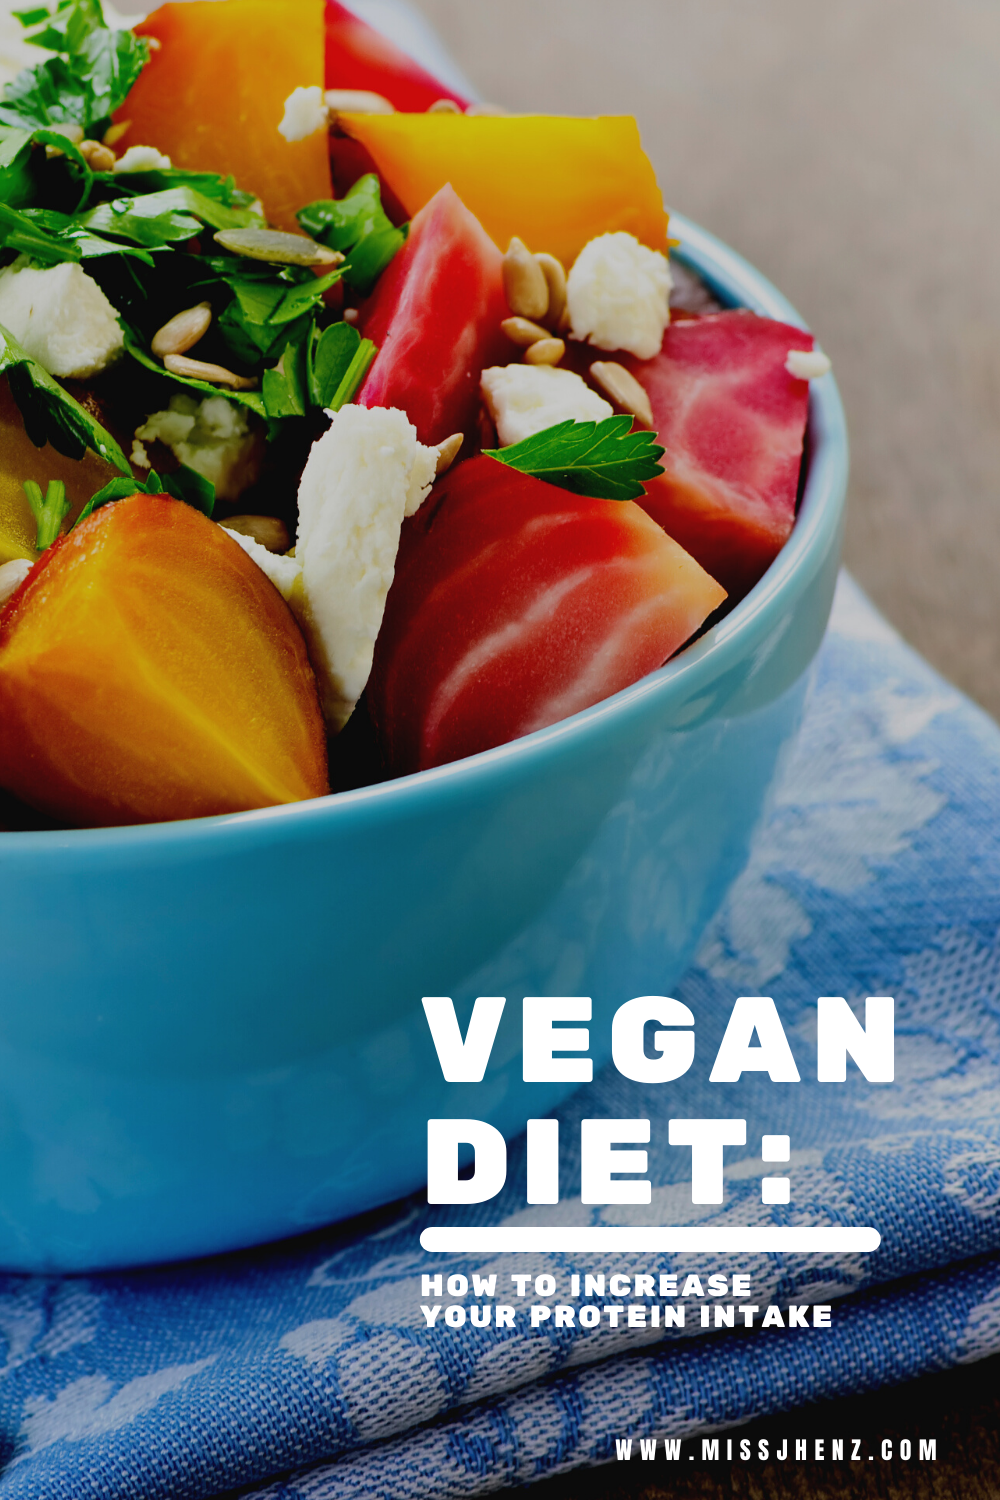 Vegan Diet: How To Increase Your Protein Intake